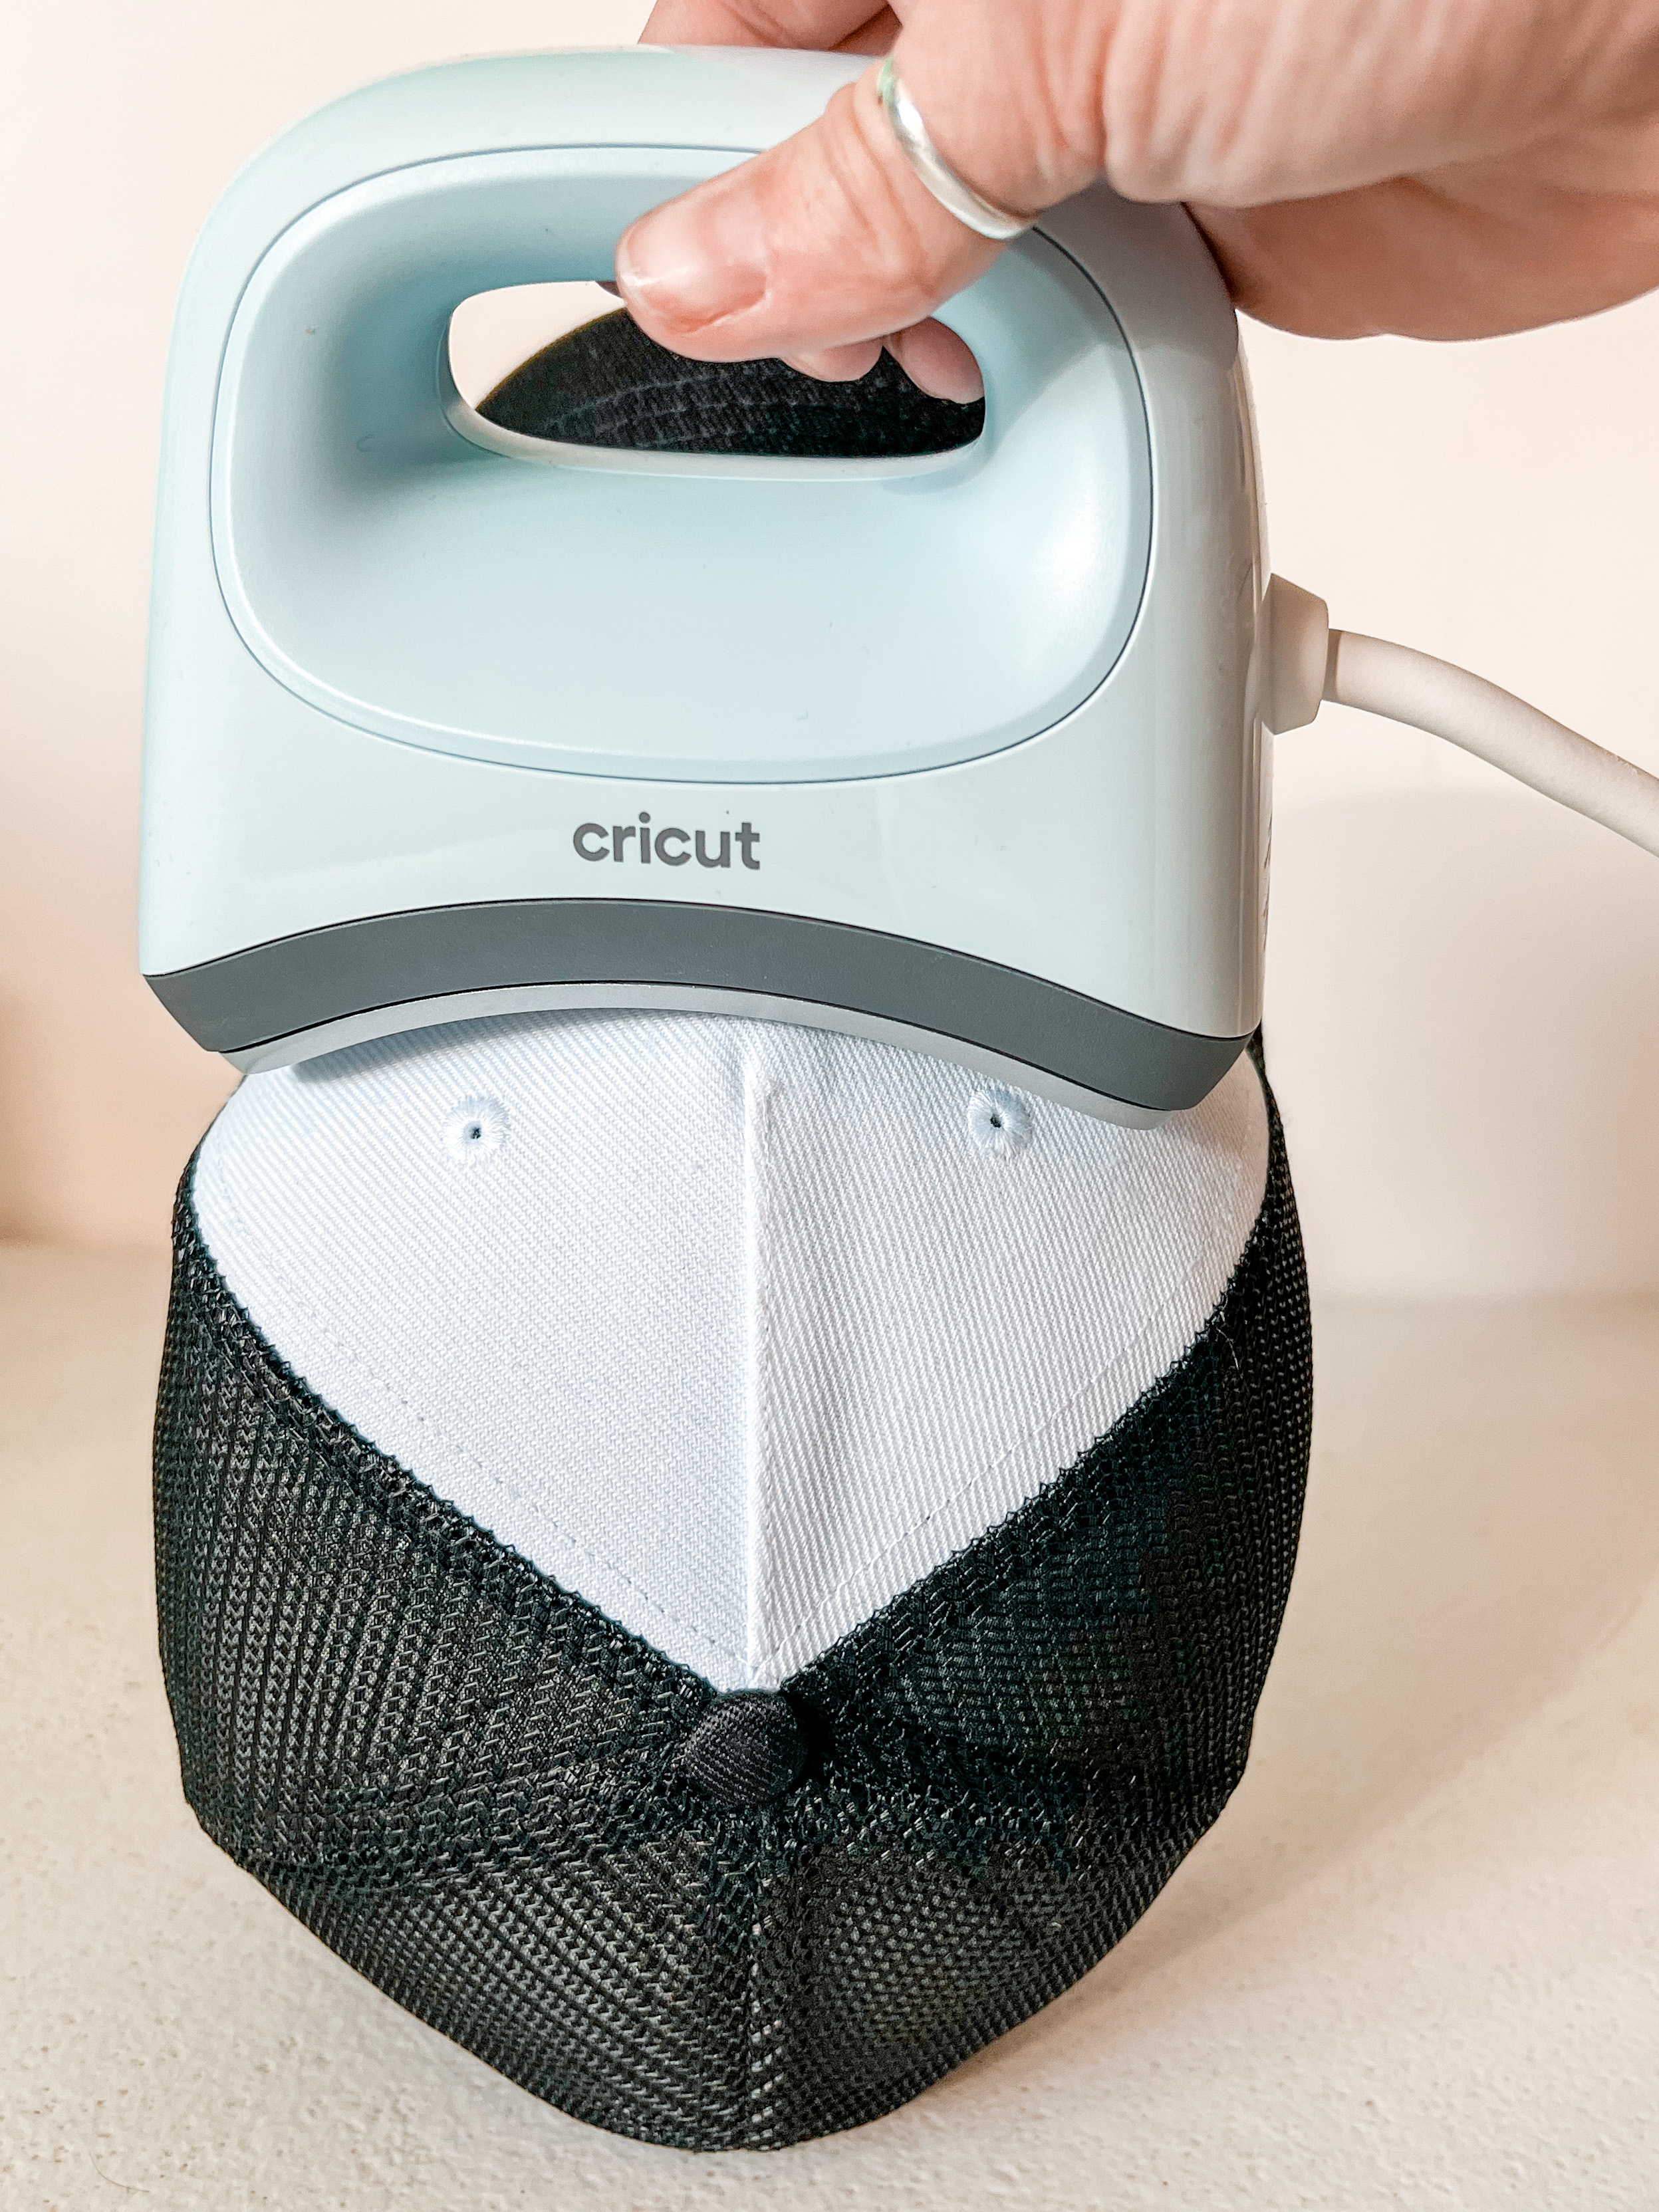 Cricut Hat Press - Everything You Need to Know! - Creative Housewives